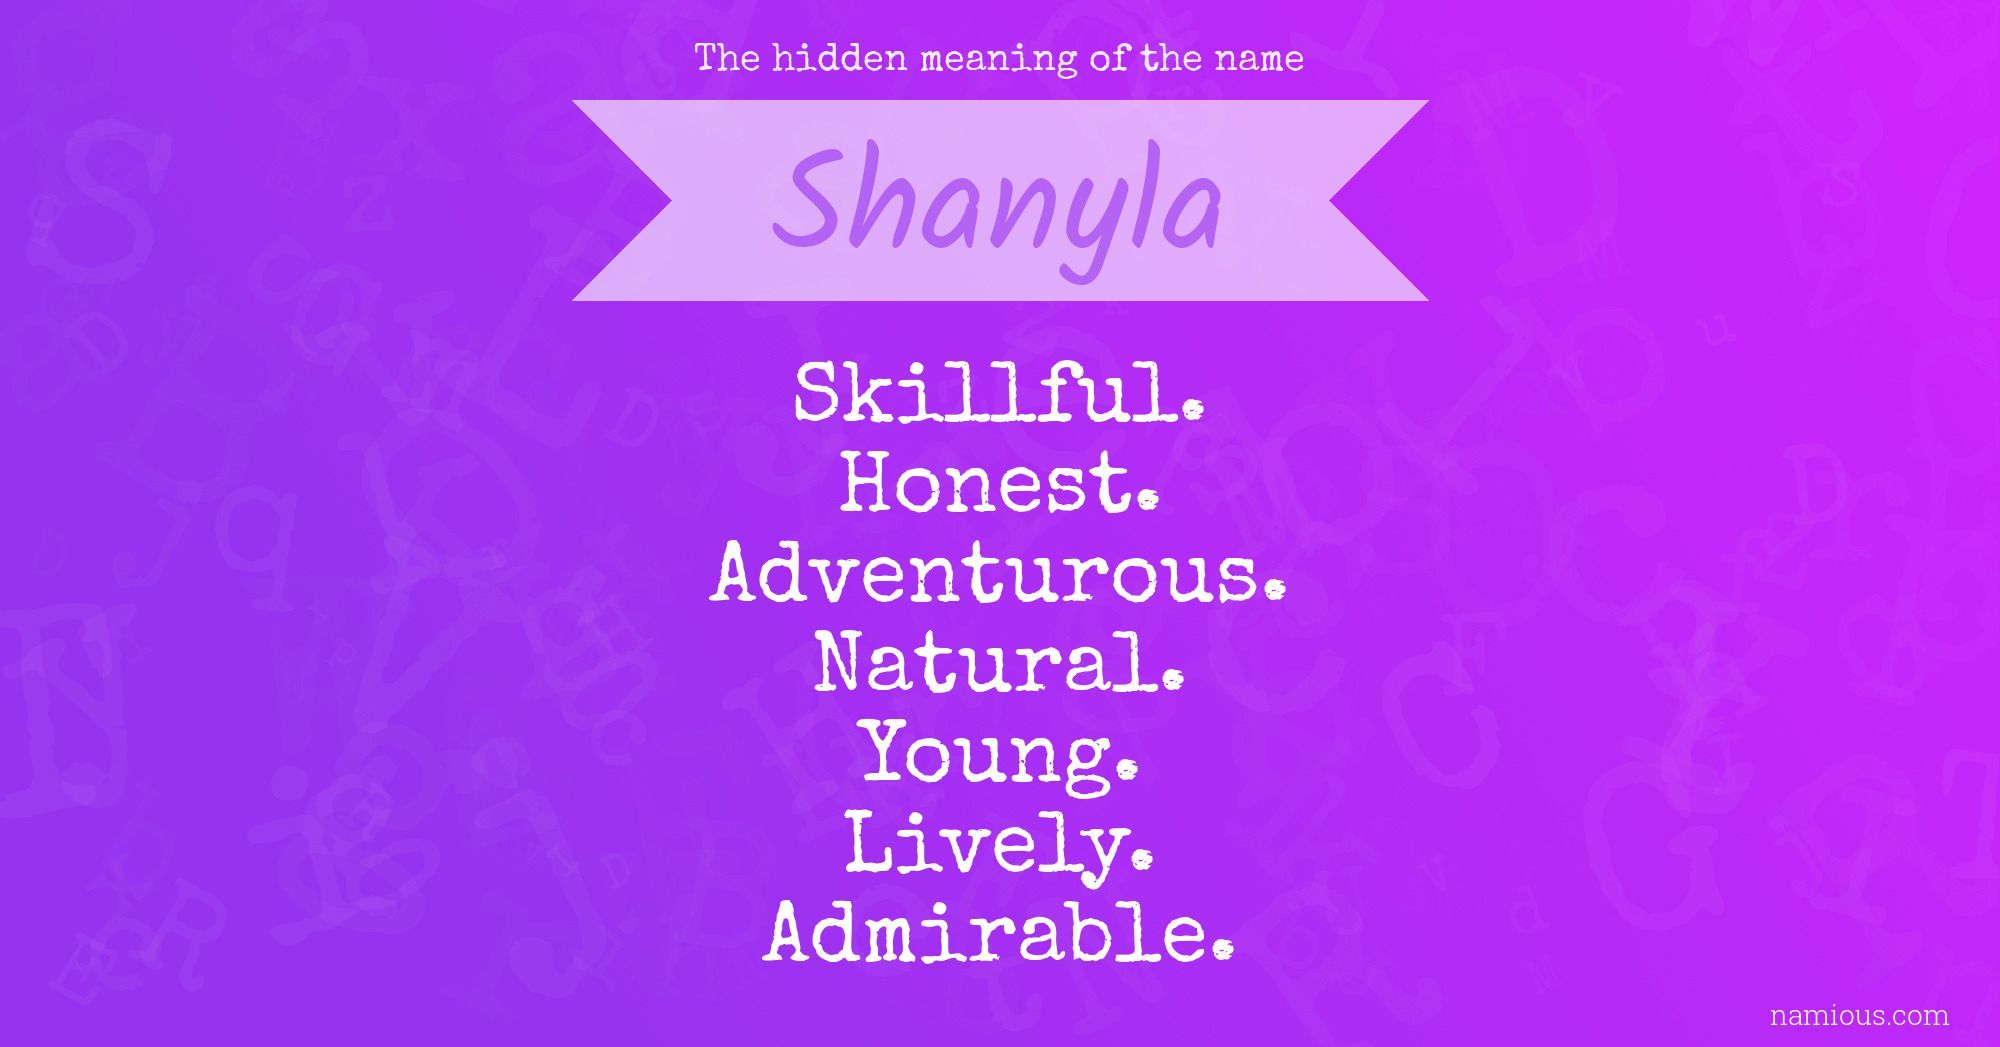 The hidden meaning of the name Shanyla